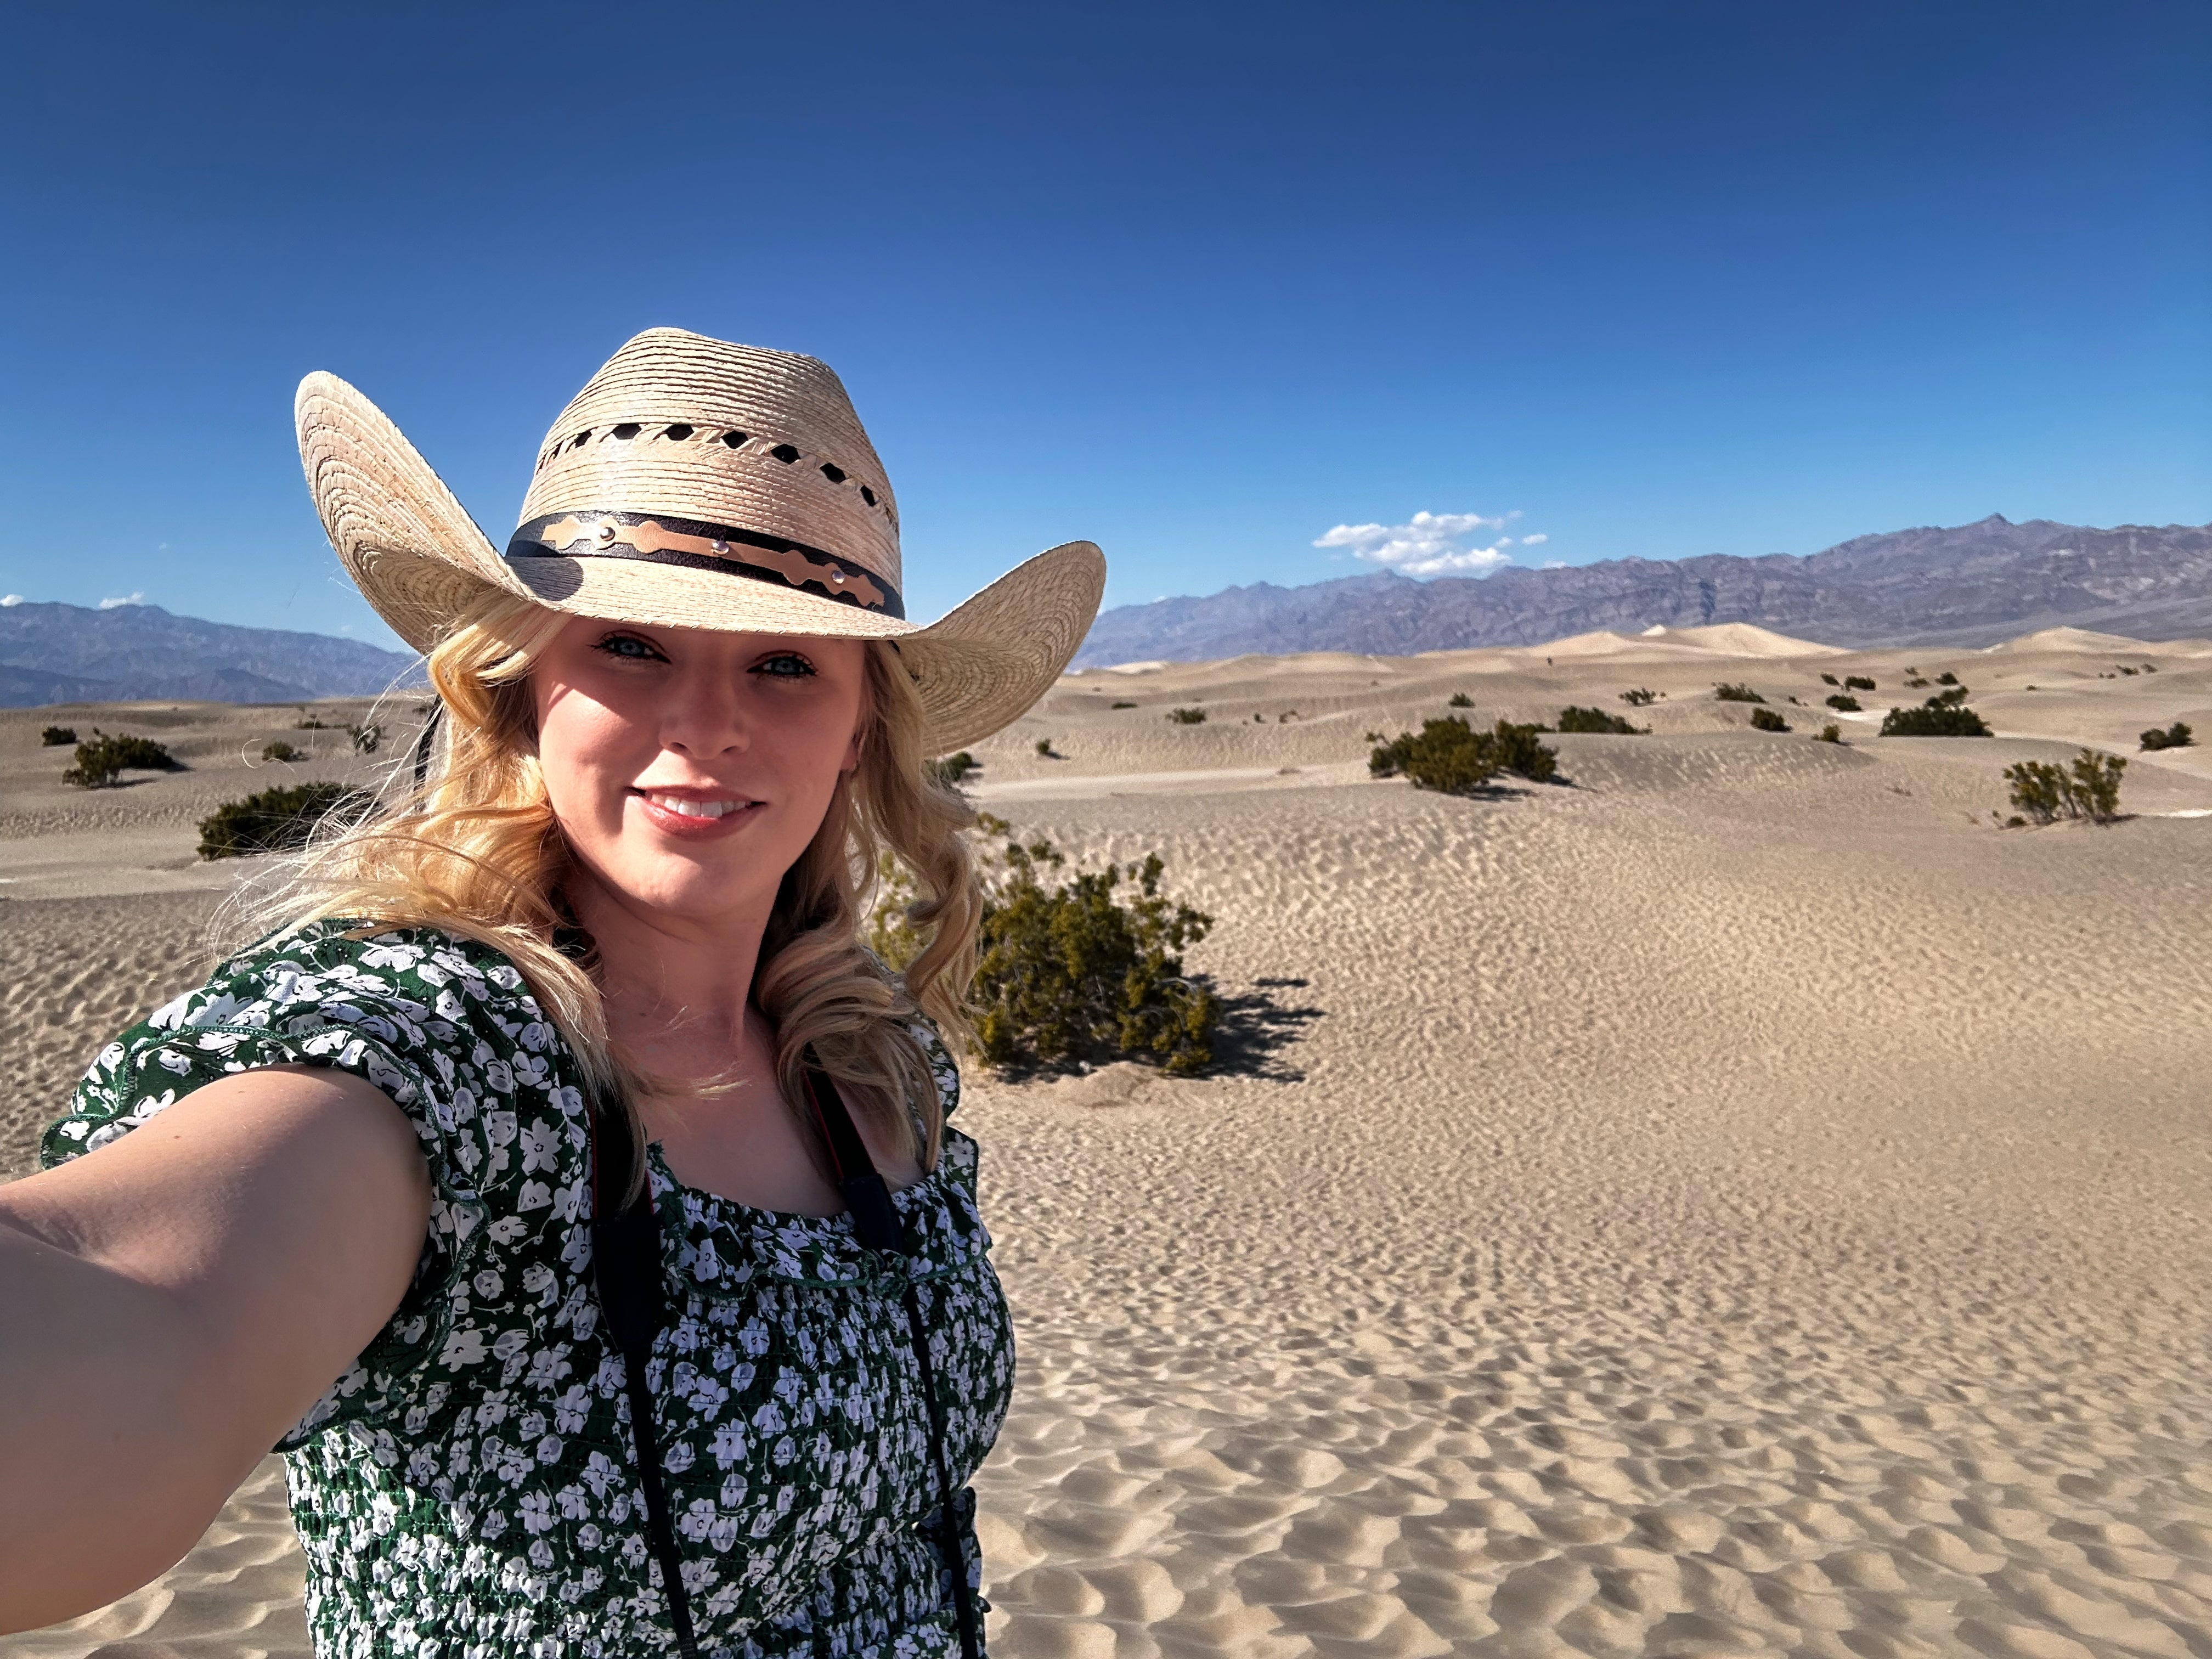 Laura at the Mesquite Sand Dunes in Death Valley